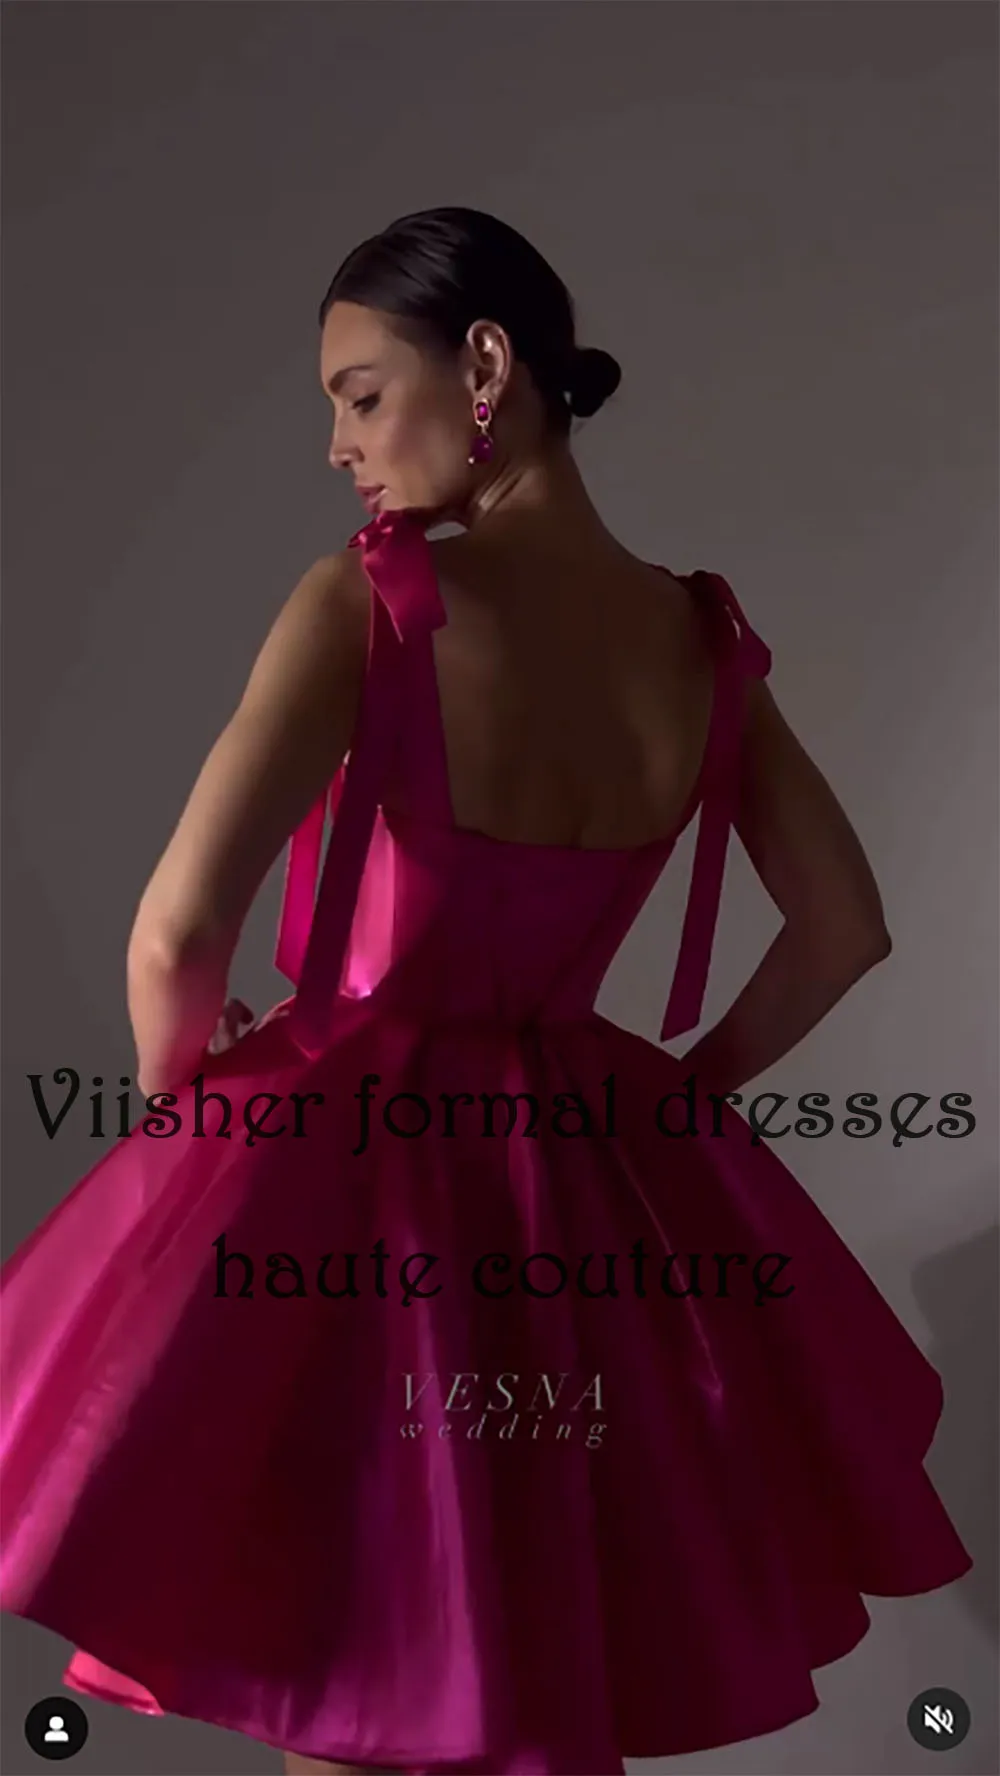 Viisher Hot Pink Sparkly Satin Short Prom Dresses with Bow Strapless A Line Puffy Evening Party Dress Sexy Mini Cocktail Gowns